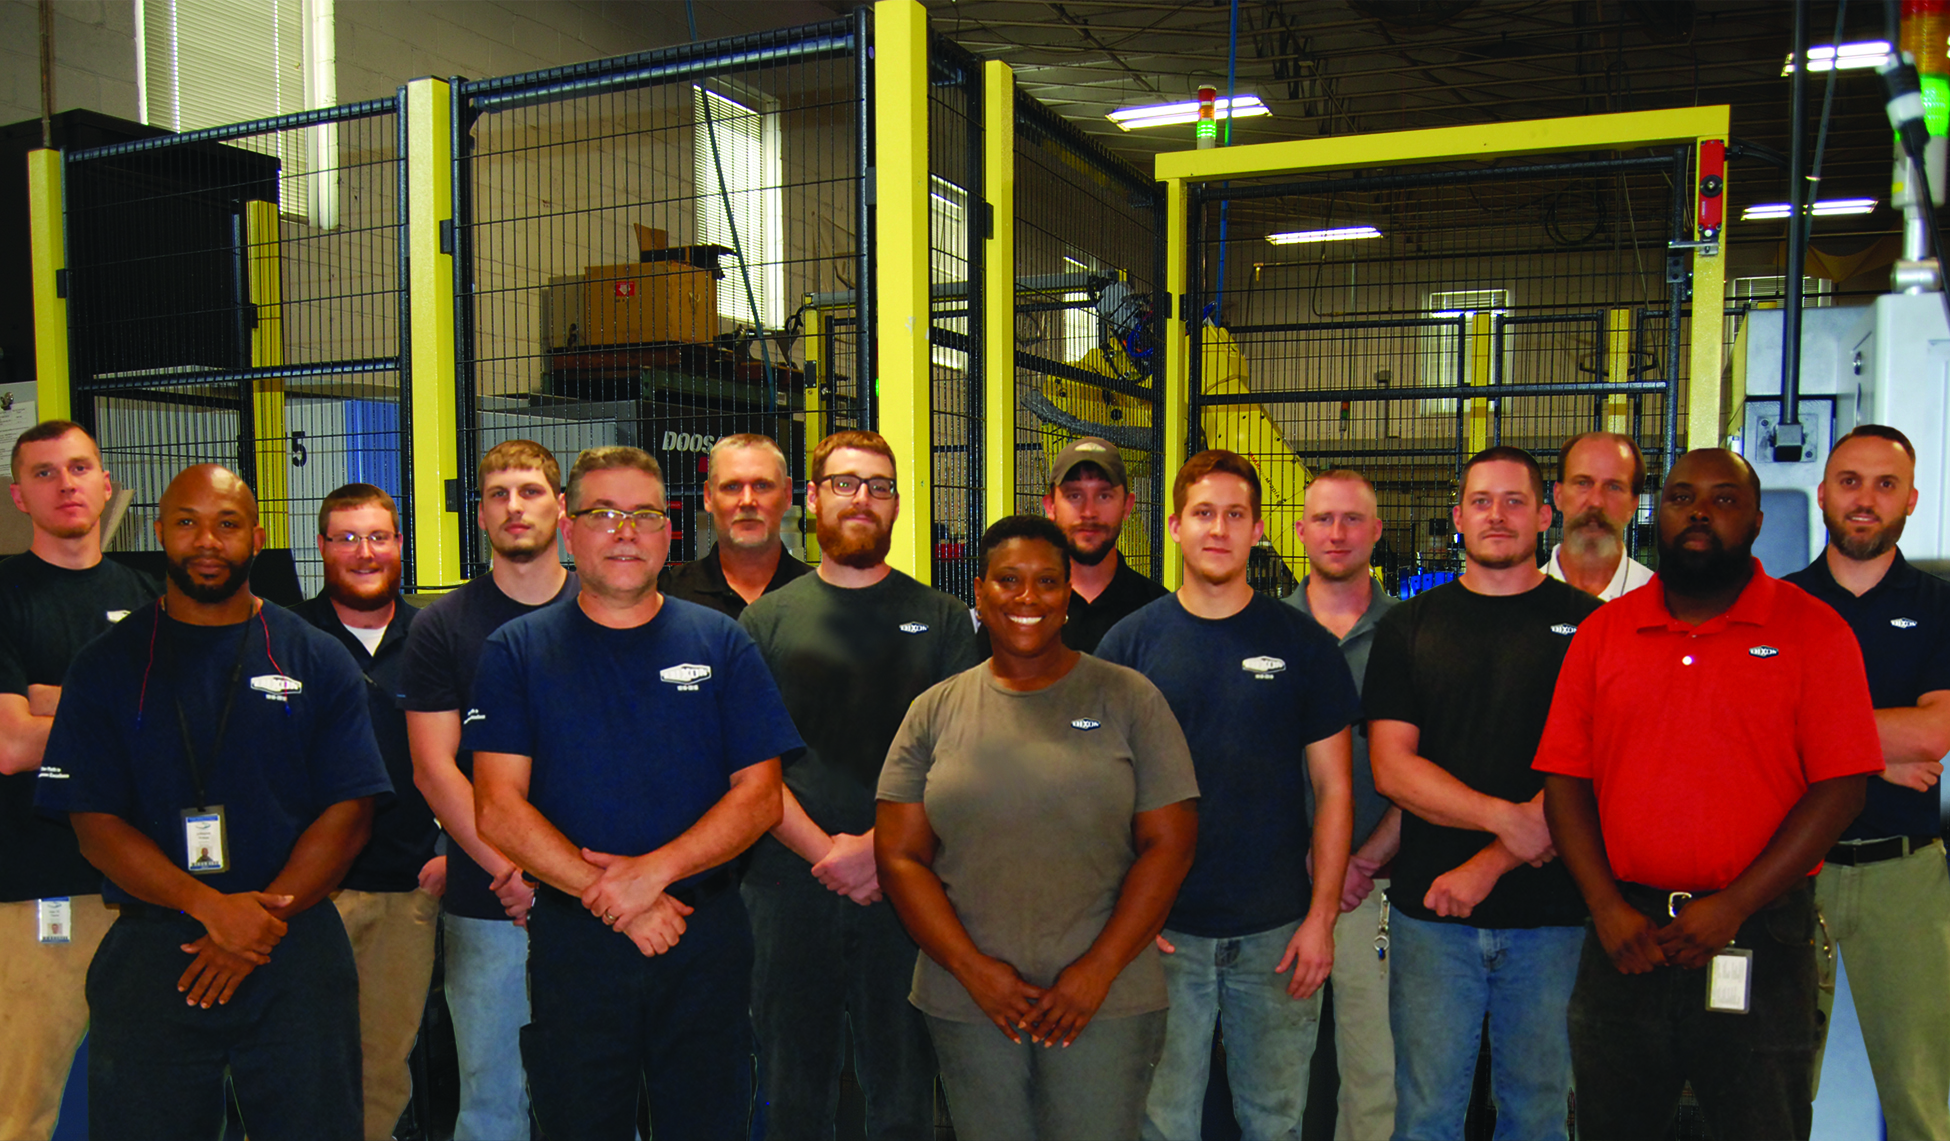 Group picture of Dixon's apprentices, steering committee members and on-the-job trainers